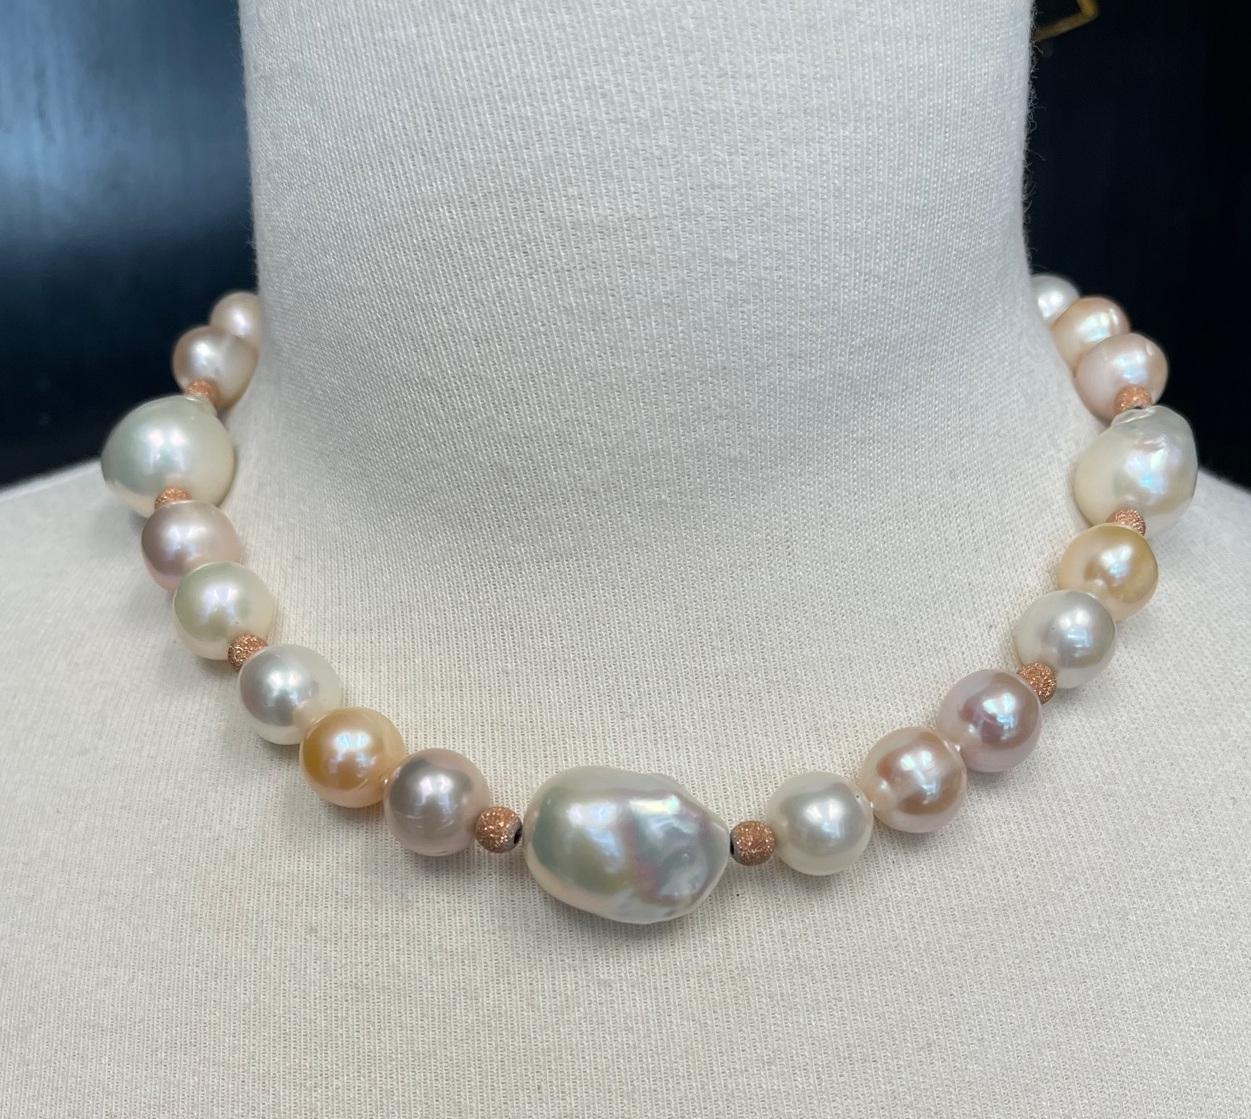 Baroque Freshwater Pearl Necklace, Peach, White and Lavender Color, 17 Inches For Sale 1